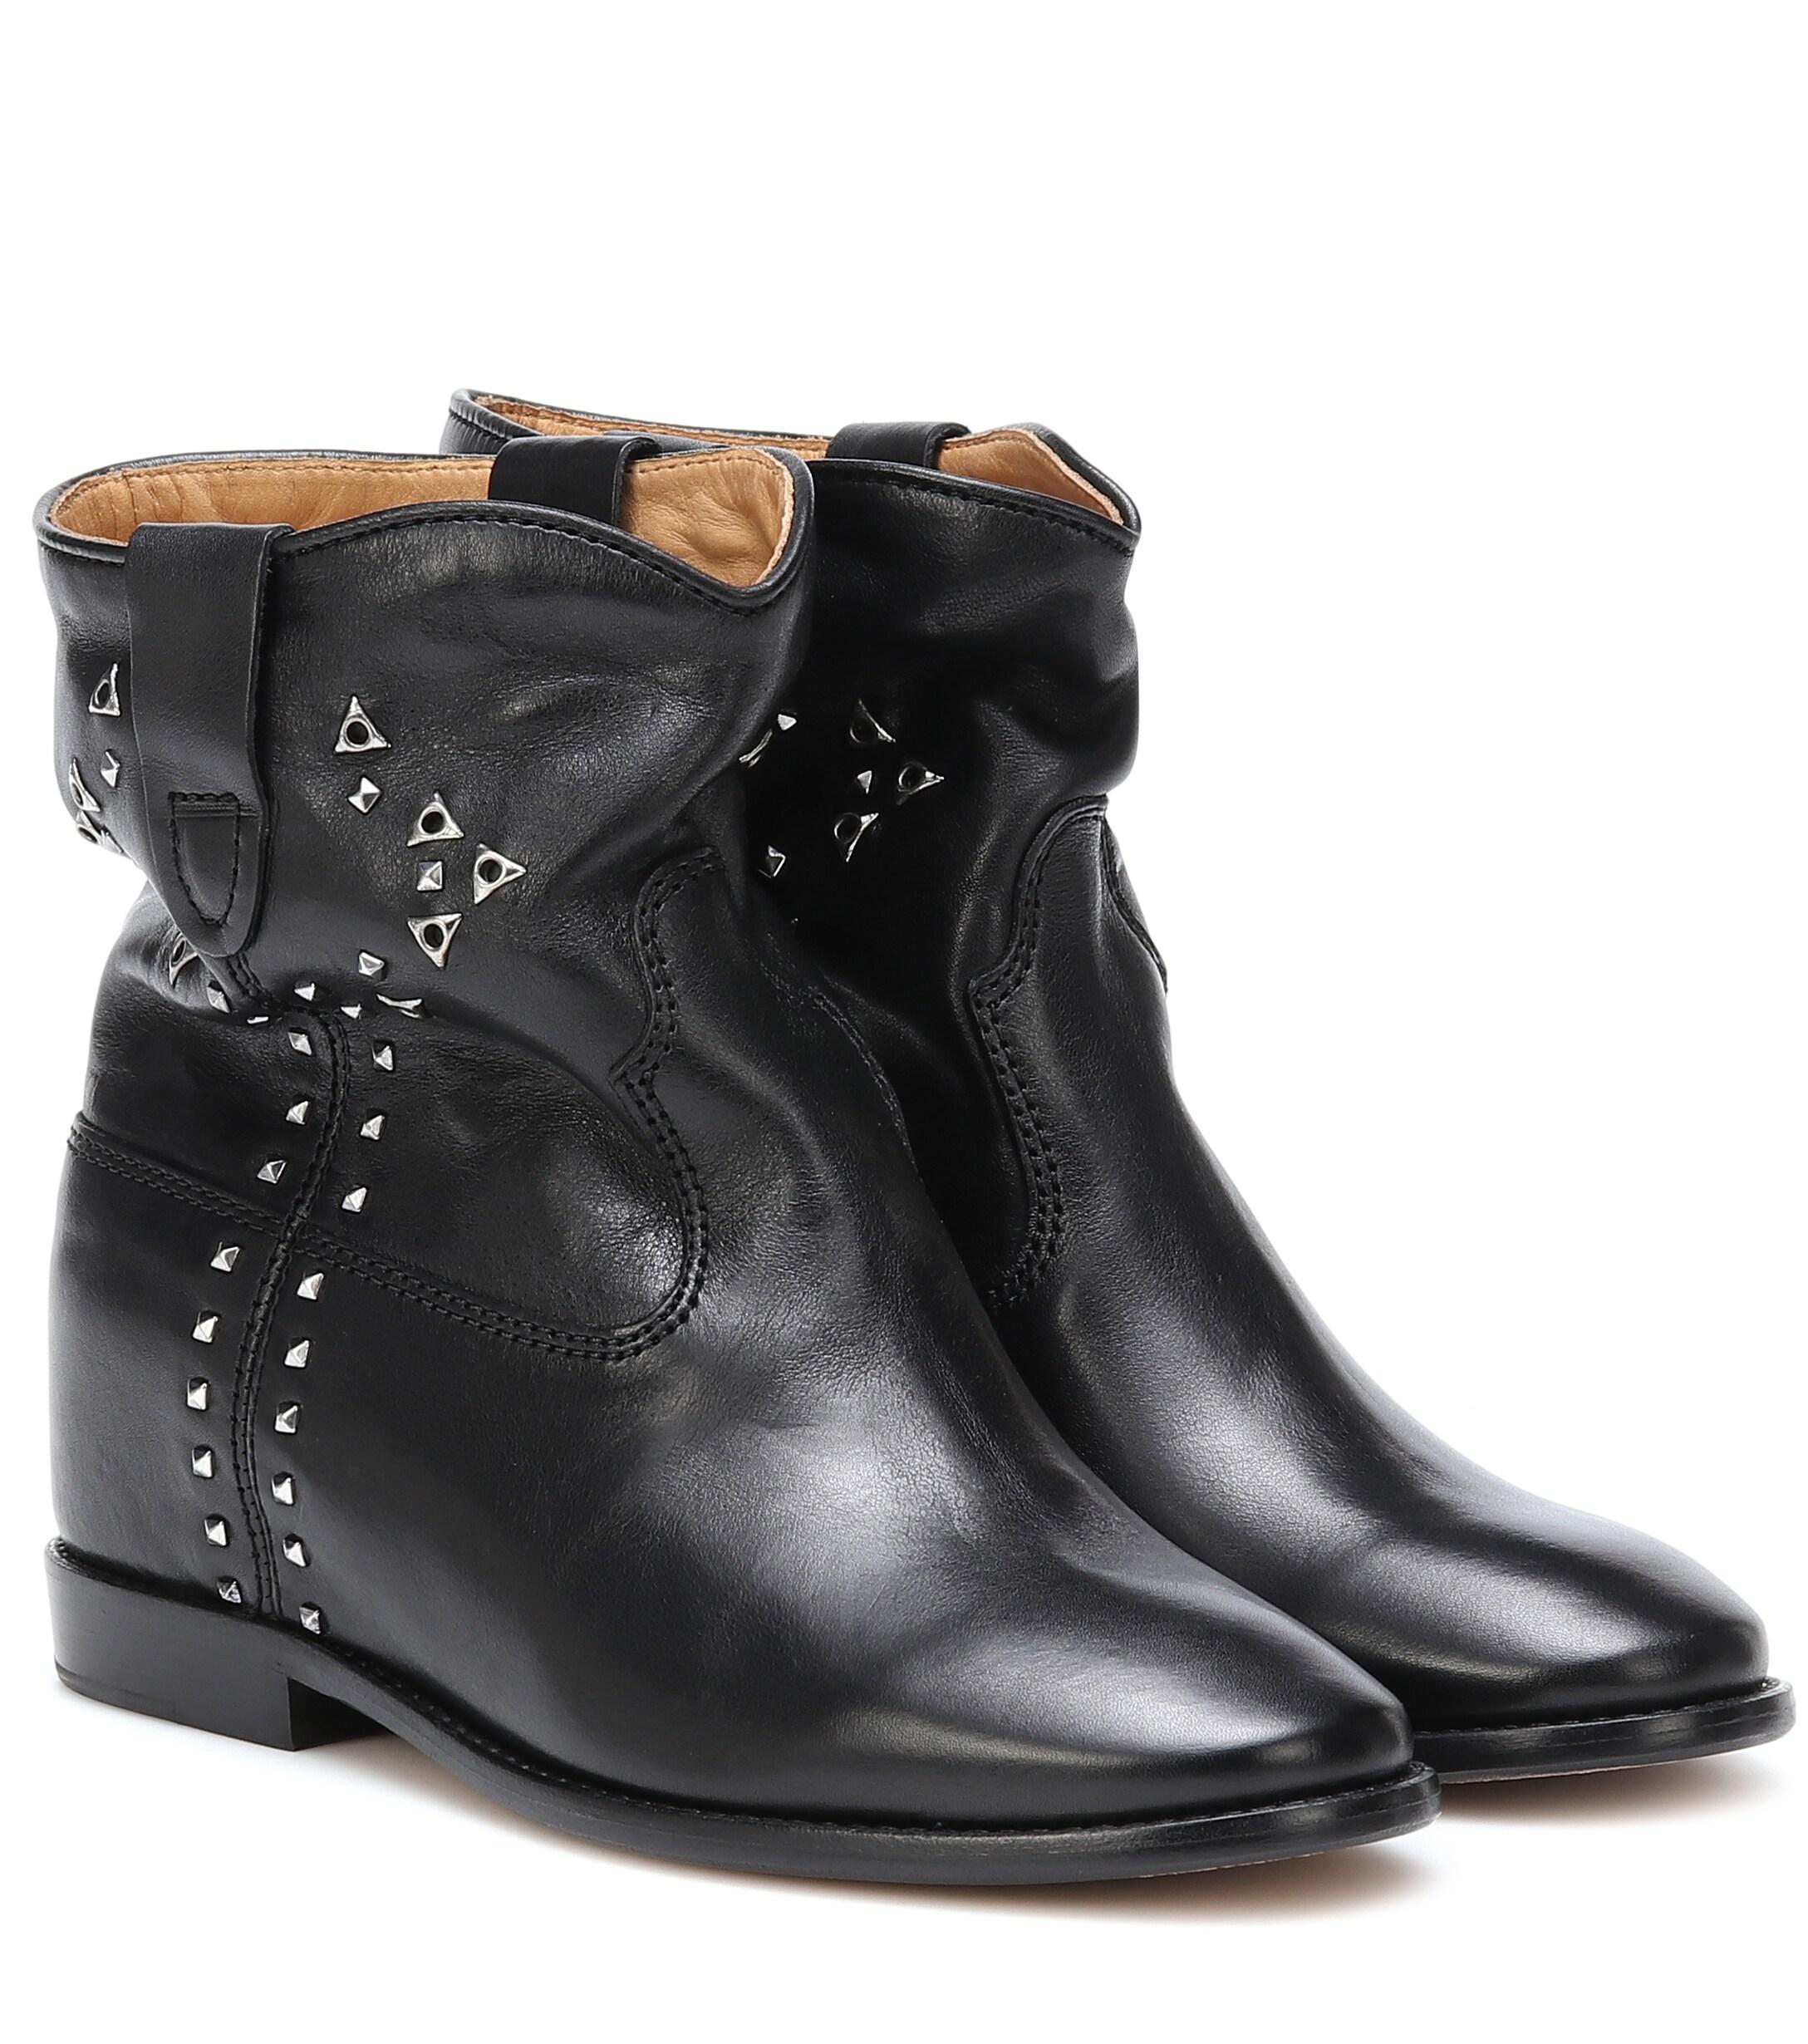 Isabel Marant Cluster Studded Leather Ankle Boots in Black - Save 35% ...